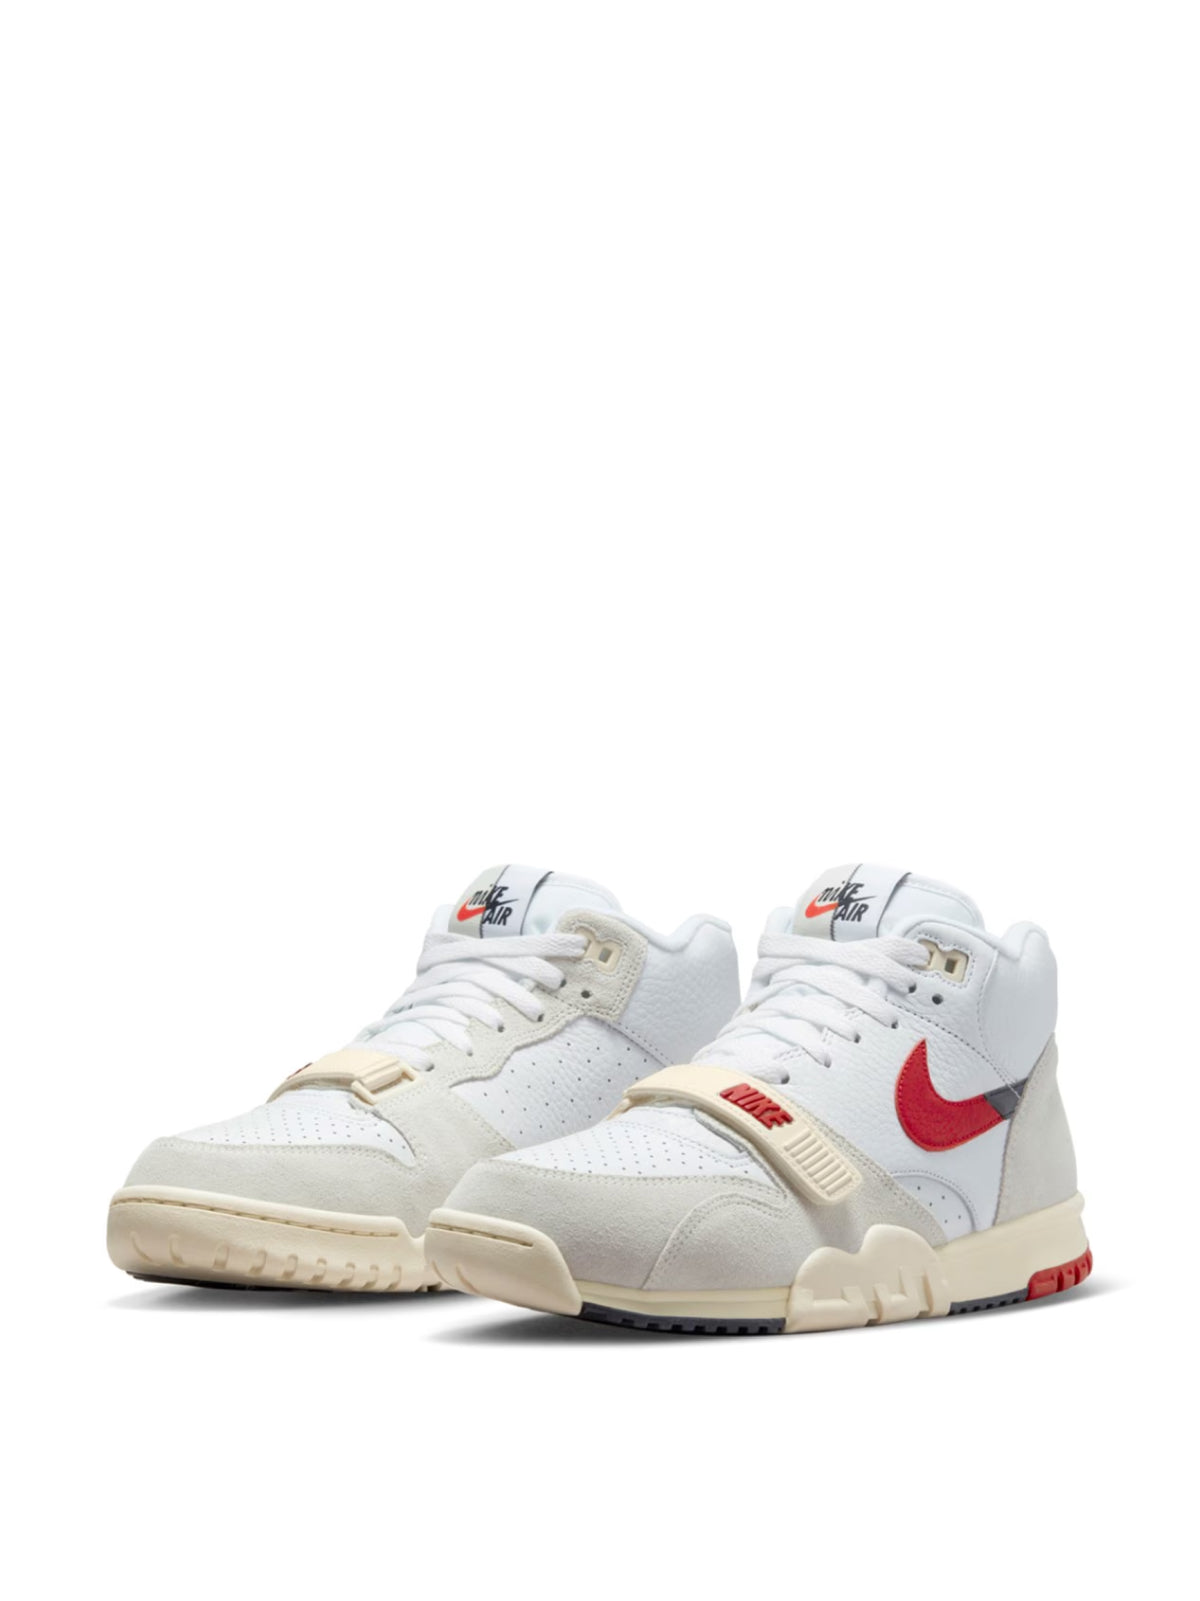 Nike-OUTLET-SALE-Air Trainer 1 'Chicago Split' Sneakers-ARCHIVIST